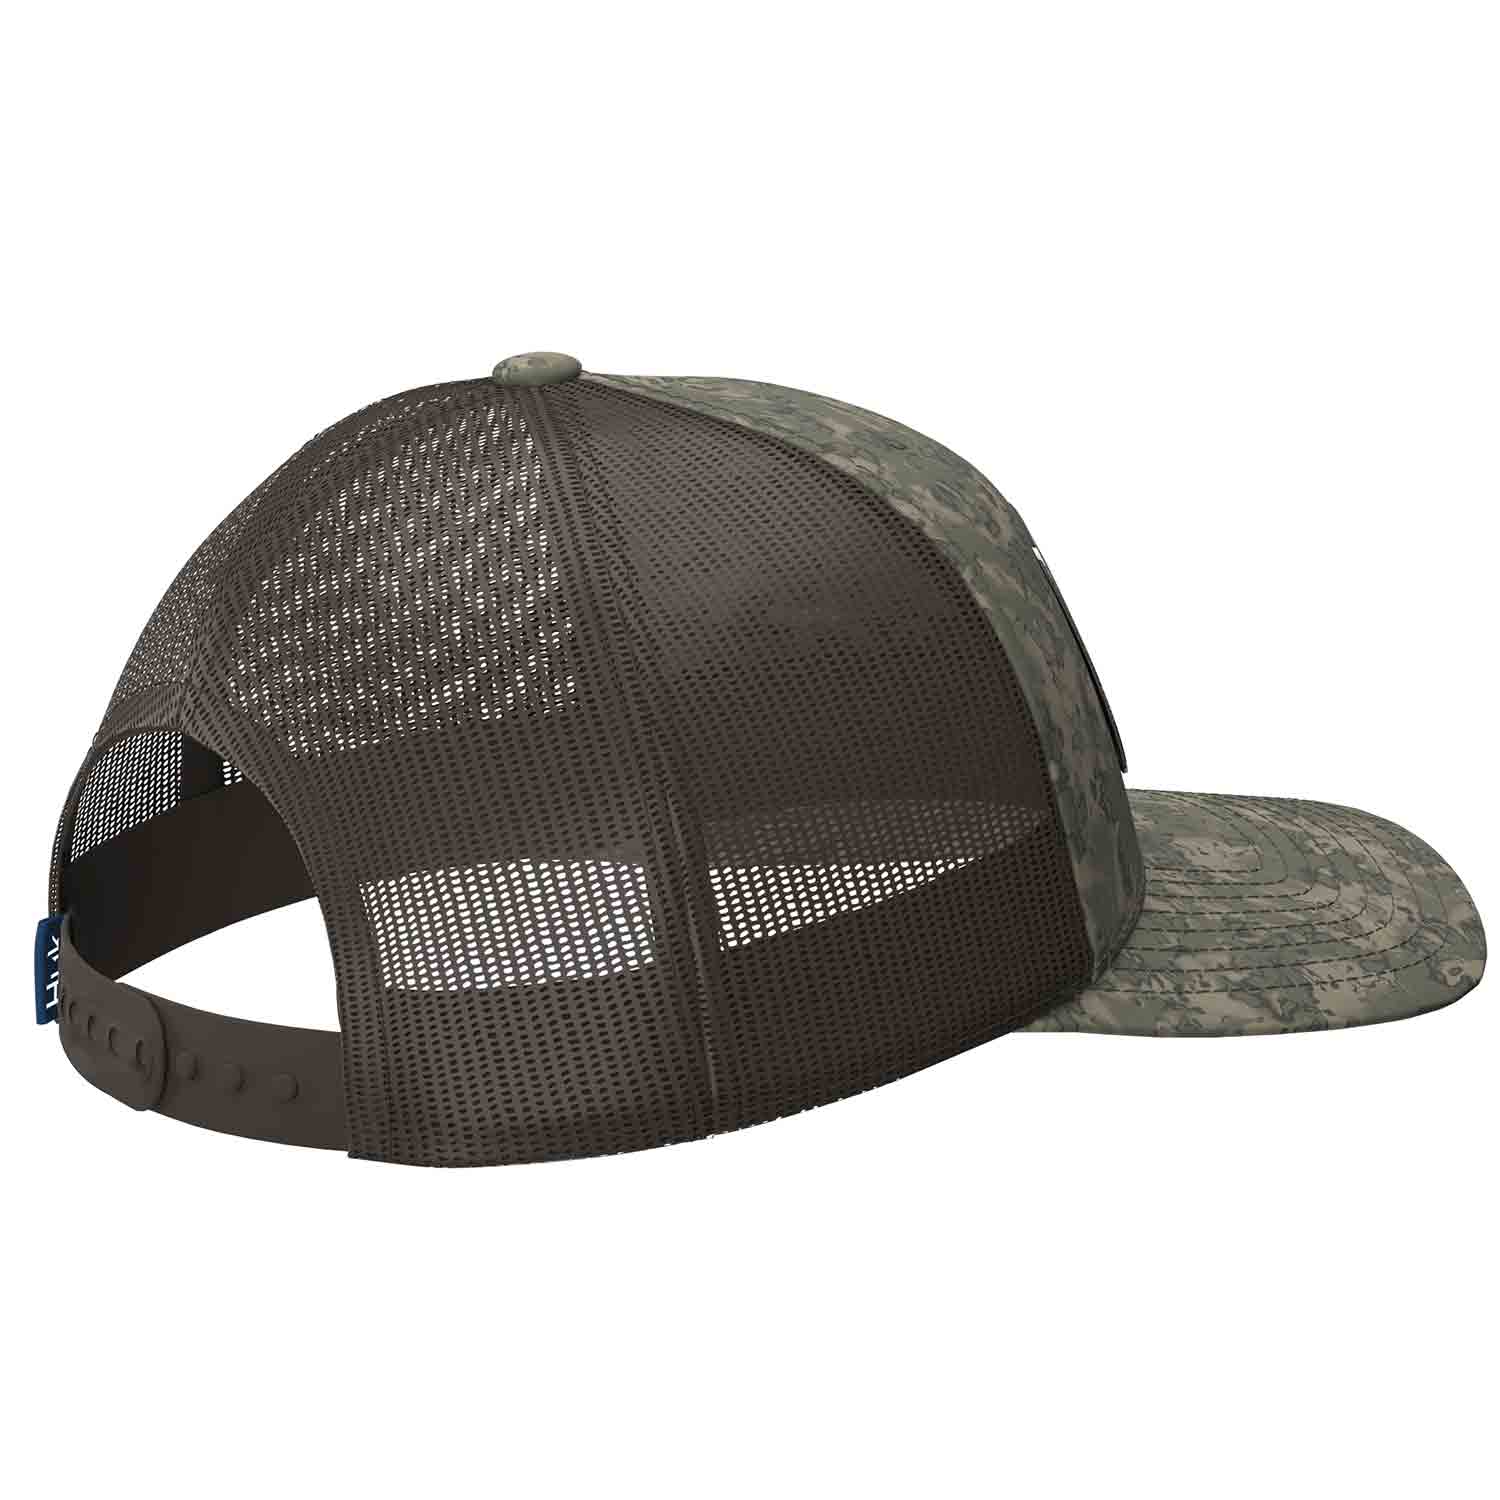 Huk Camo Trucker Stretch Hat - Southern Tier - Night Vision - L/XL -  TackleDirect